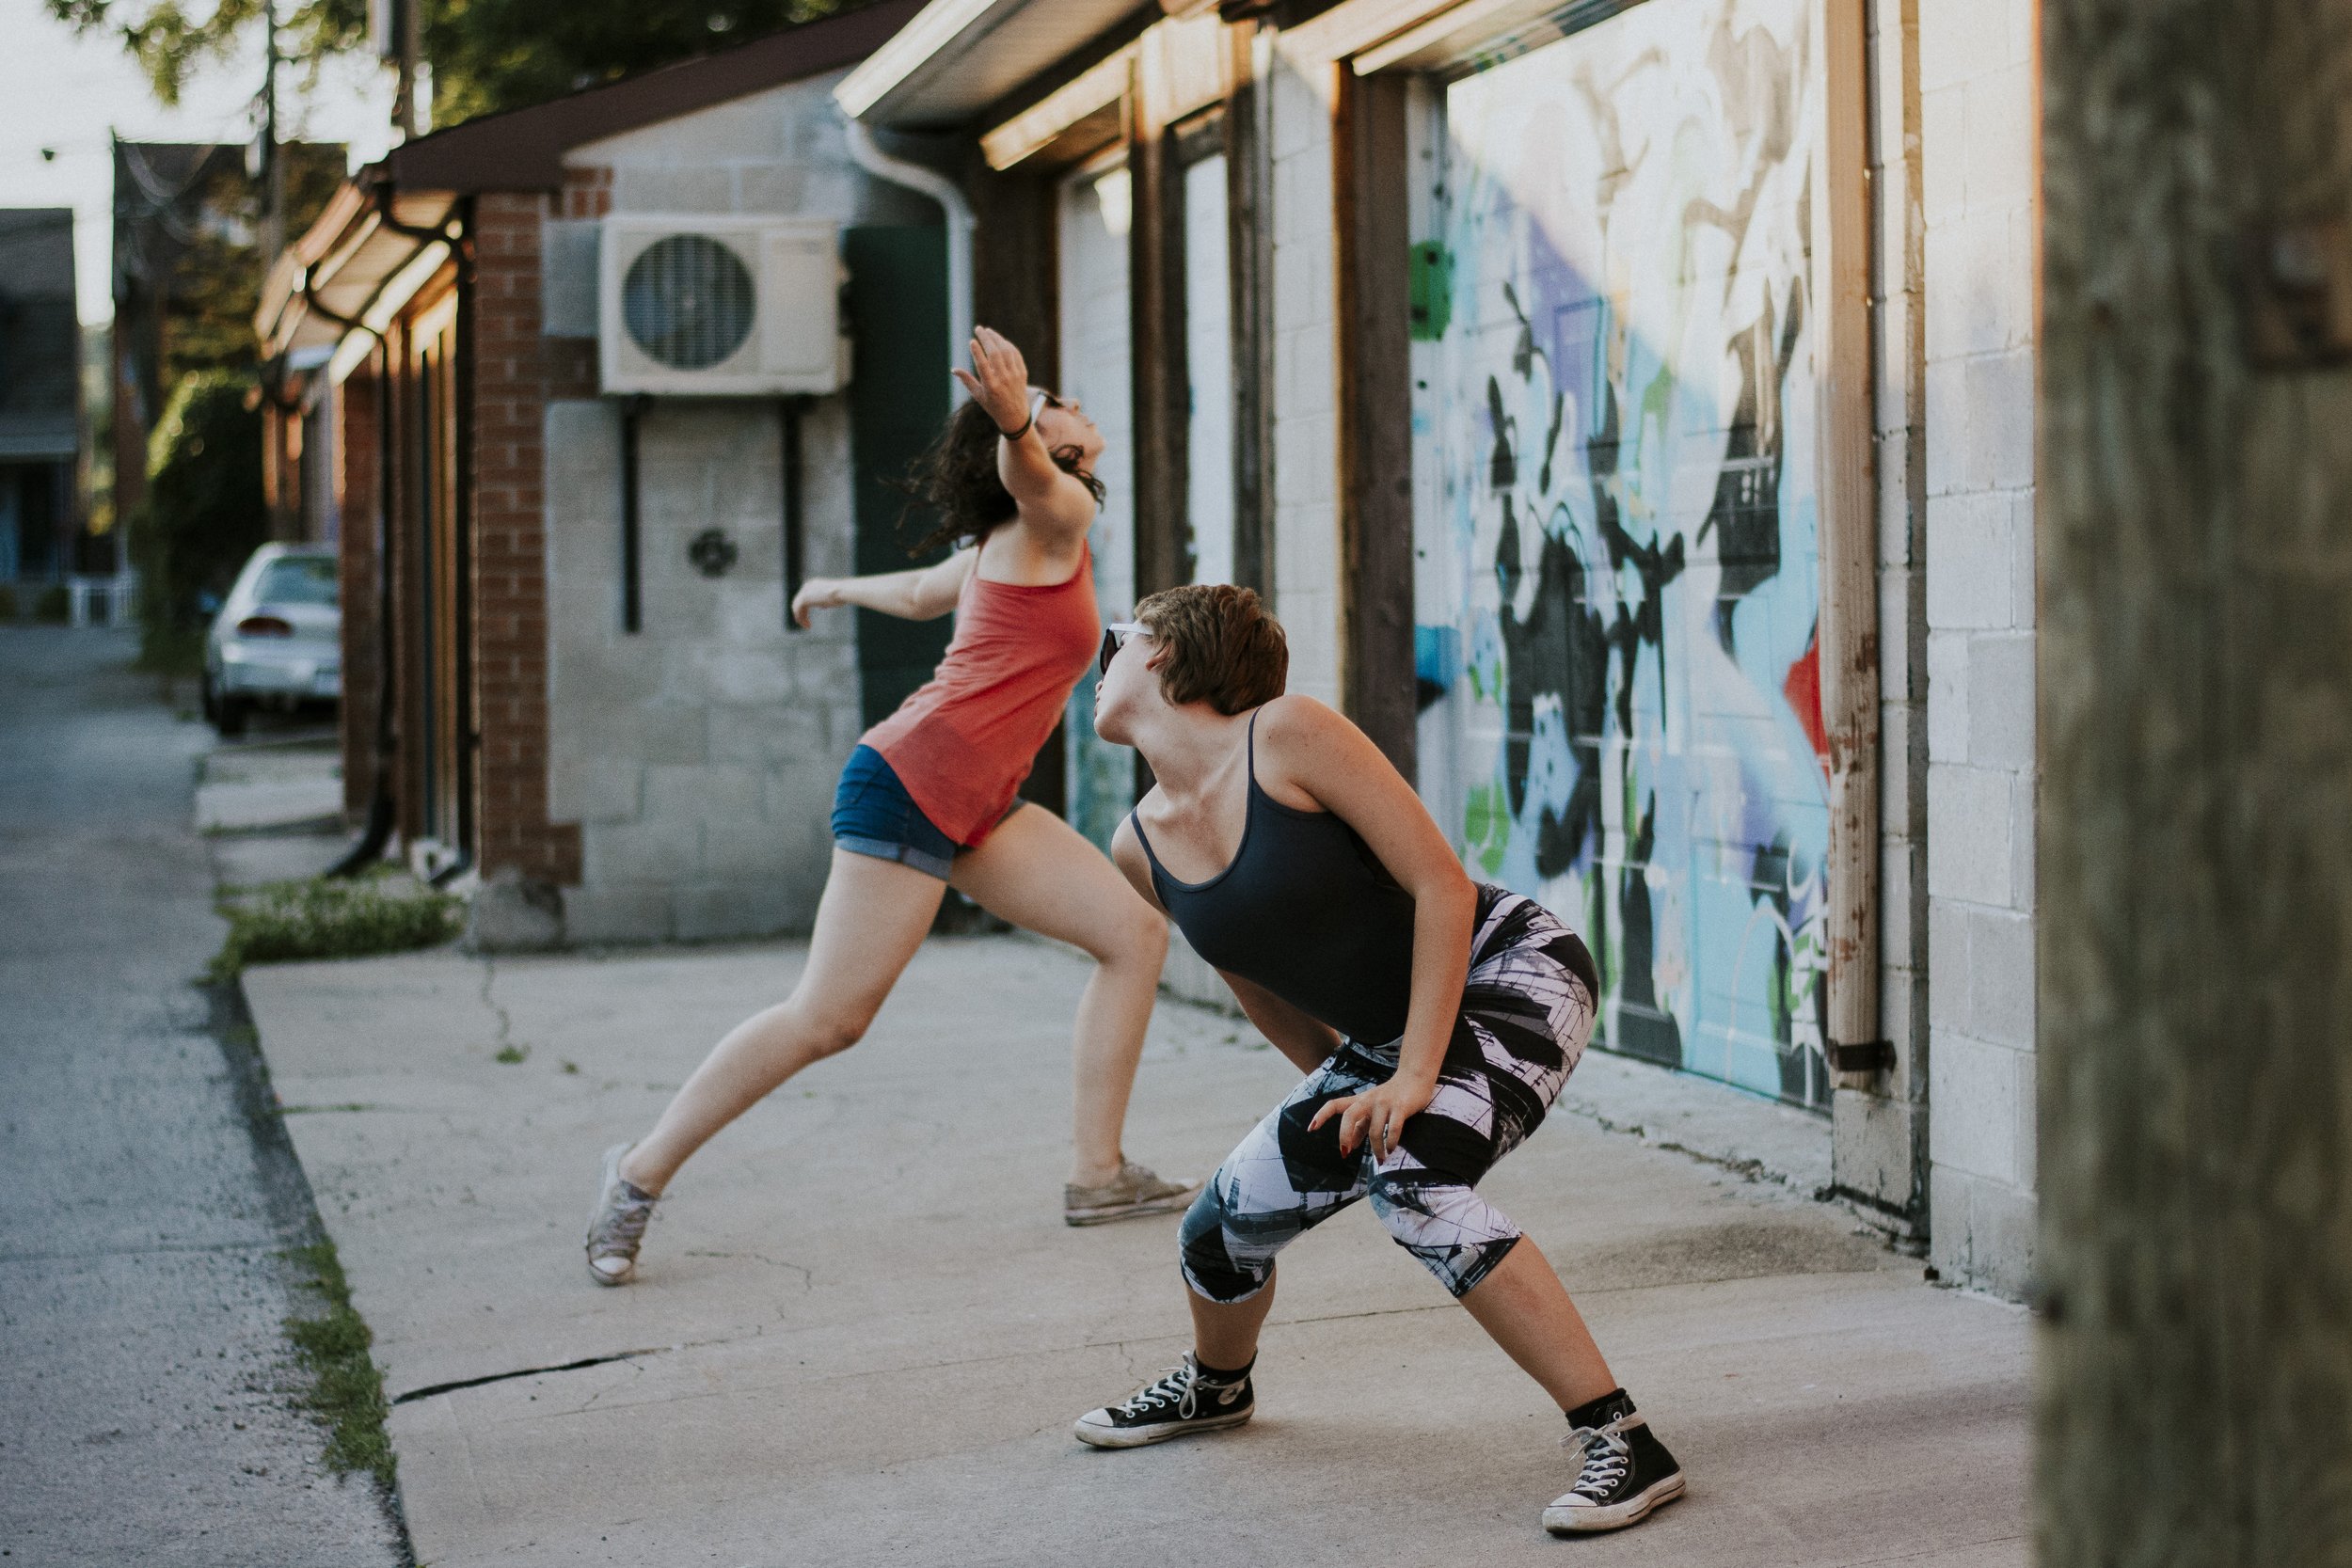 Two dancers, performing in front of a graffiti mural